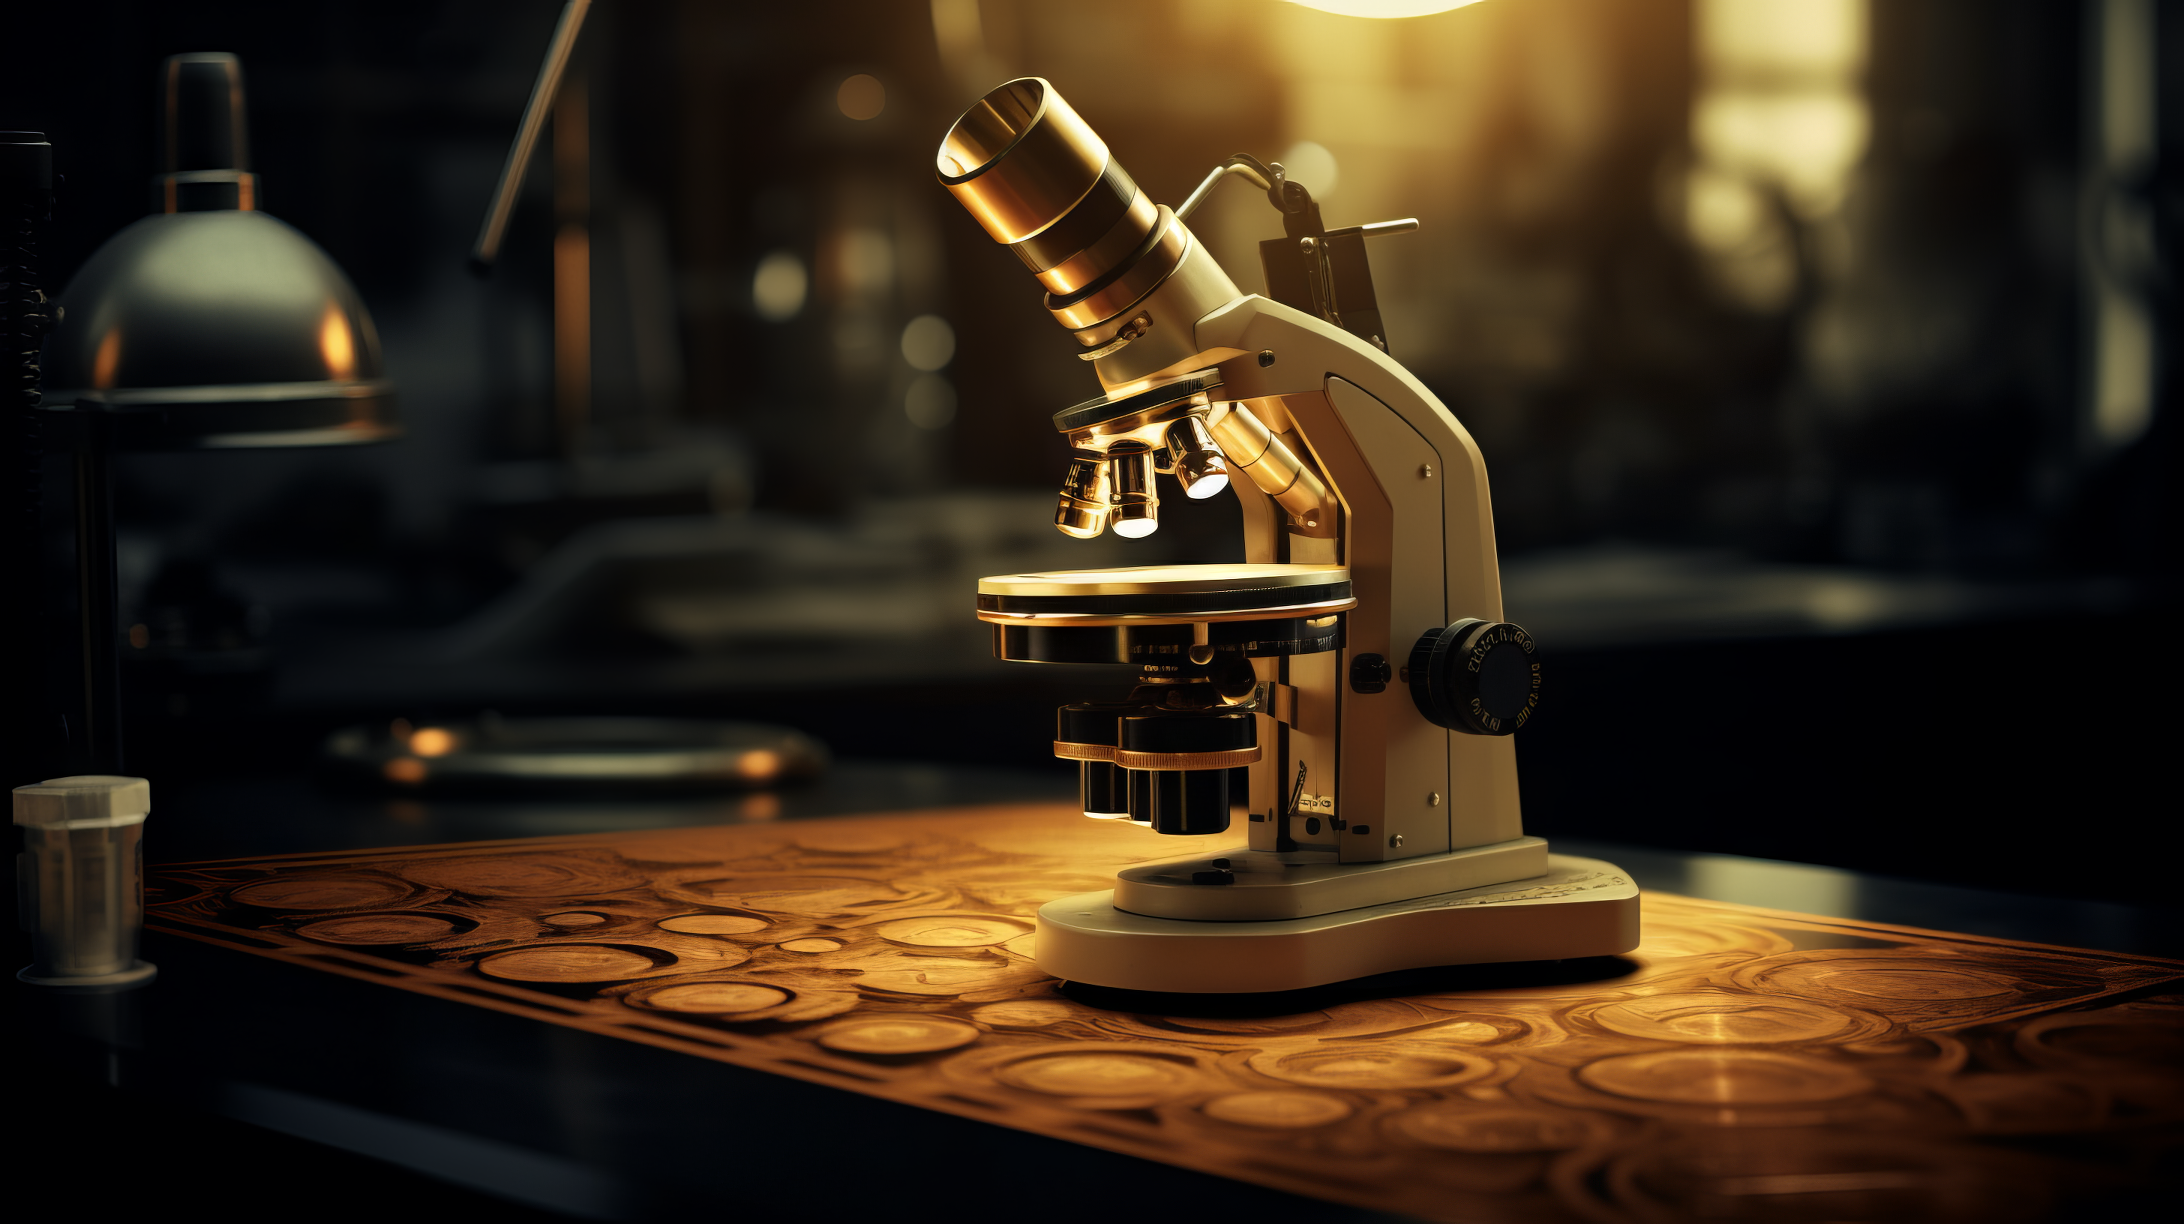 HD desktop wallpaper featuring a professional microscope on a table illuminated by warm ambient light, ideal for medical and scientific themes.